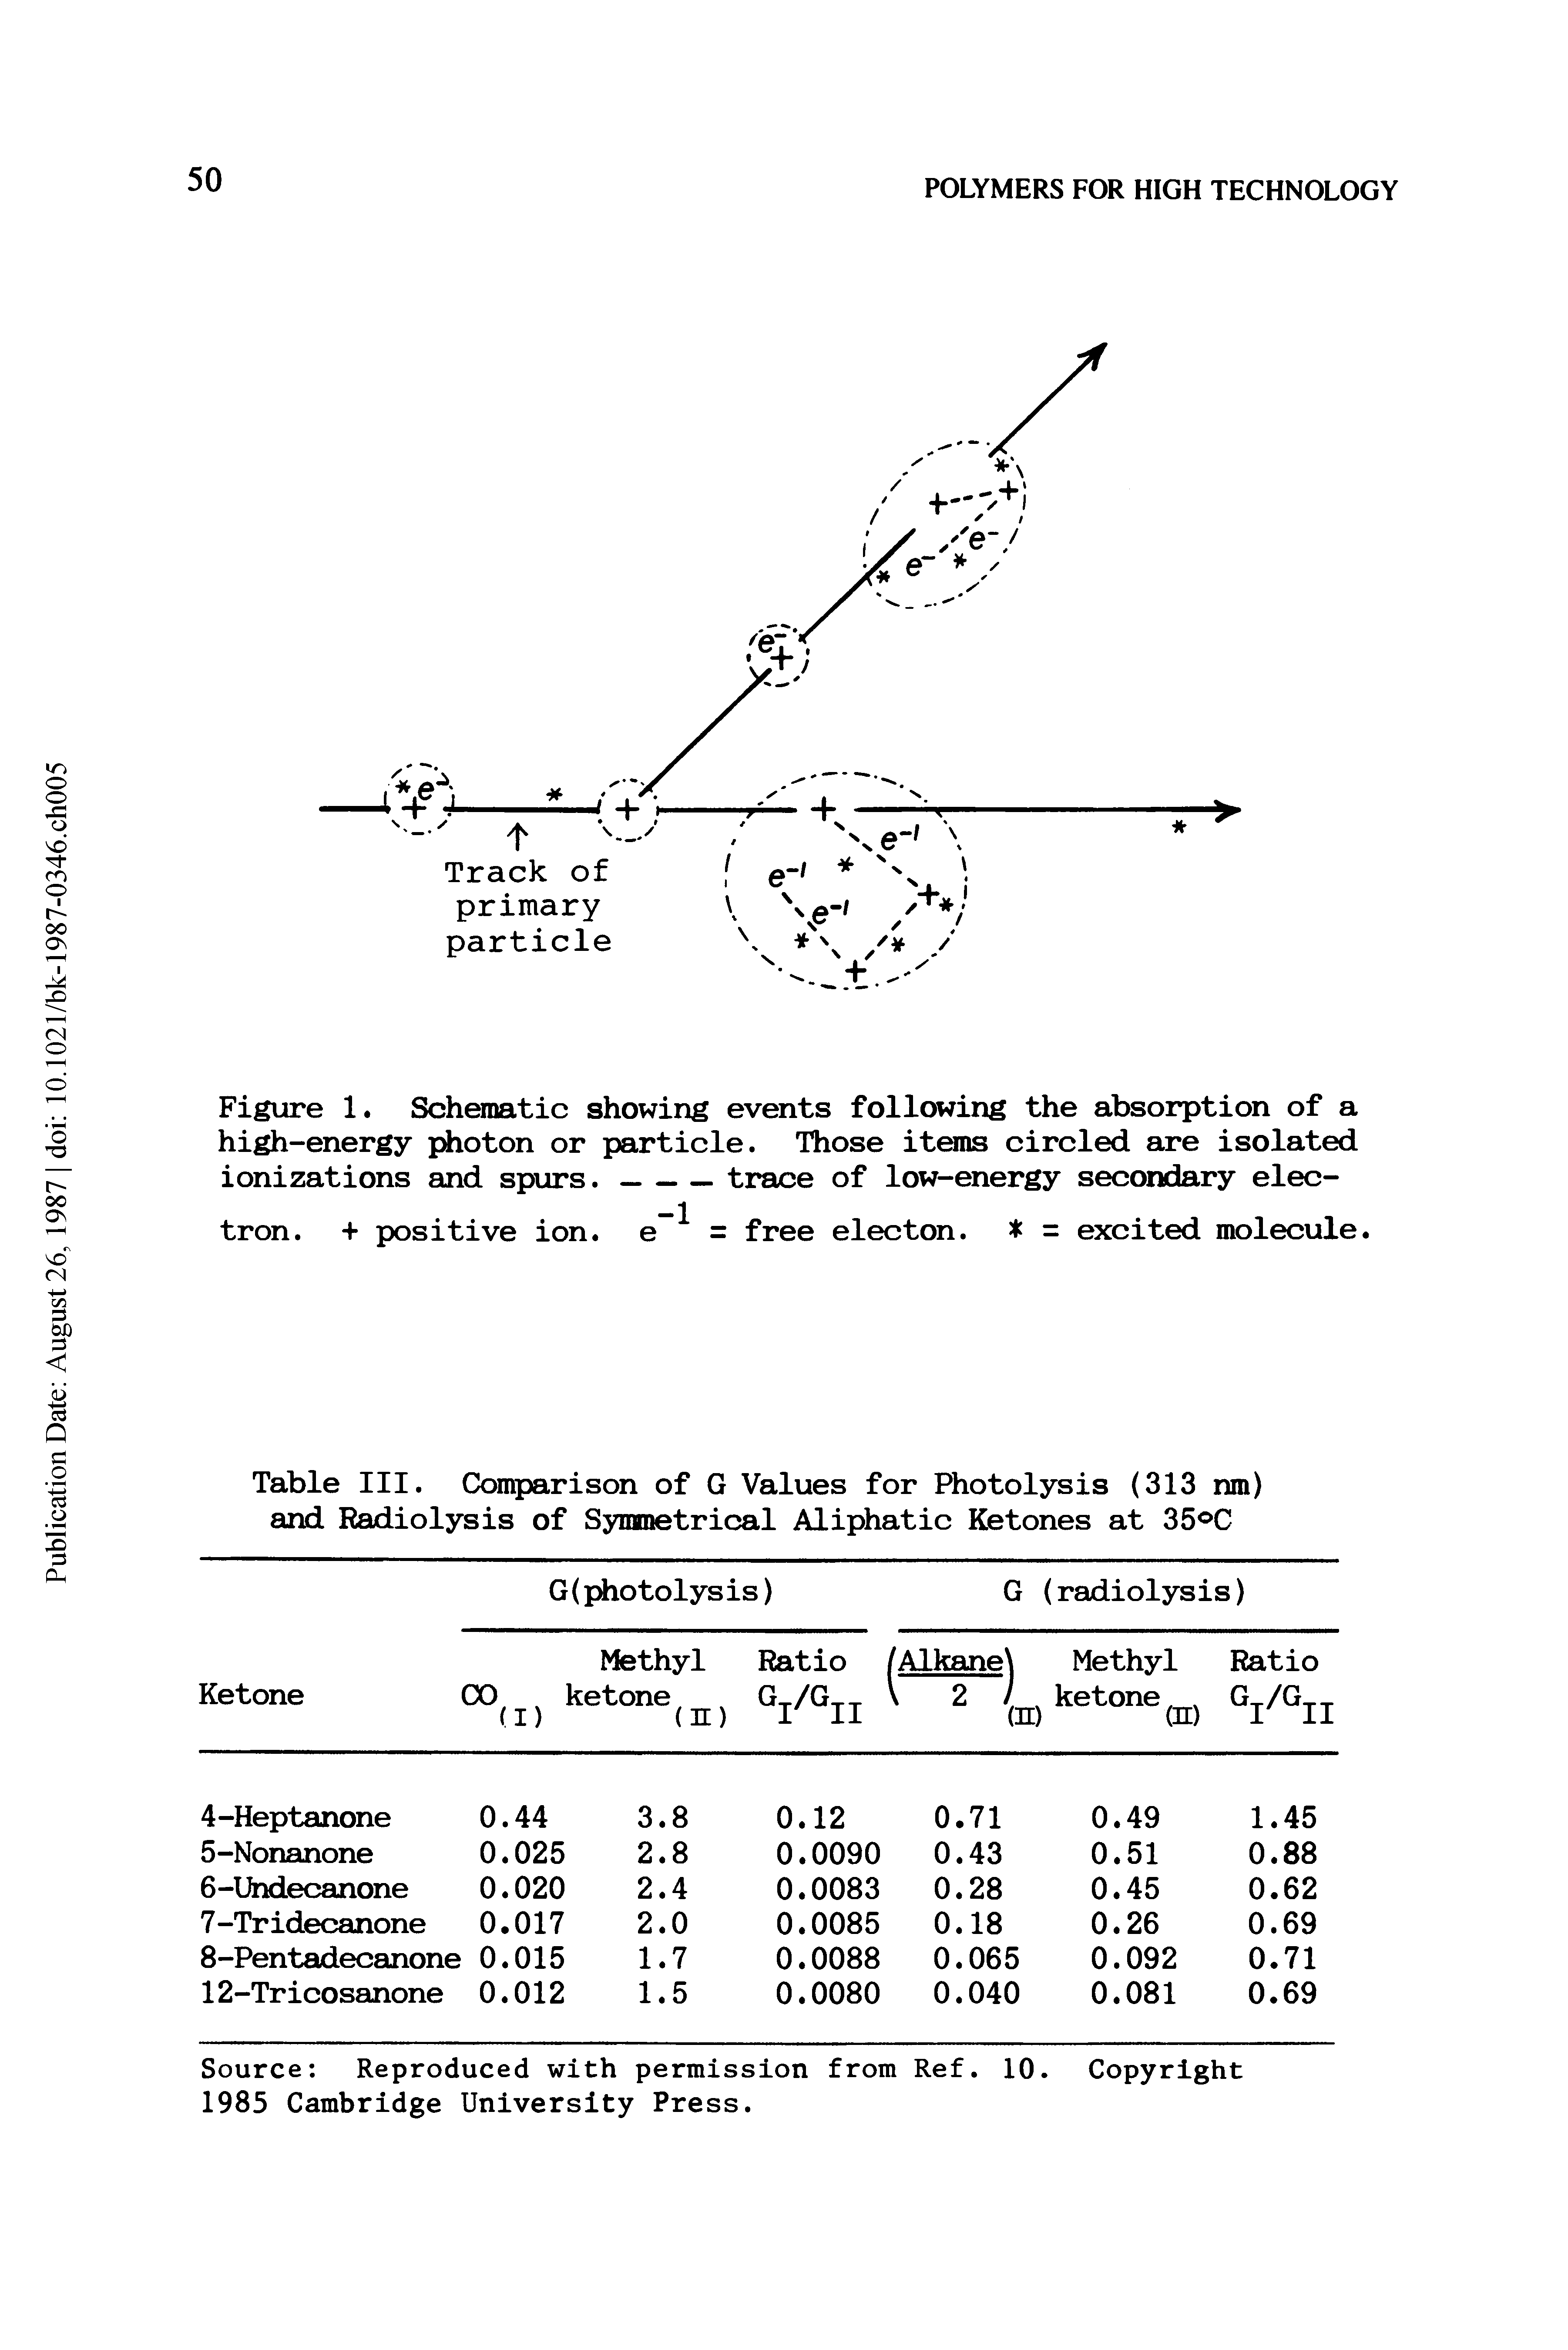 Figure 1. Schematic showing events following the absorption of a high-energy j oton or particle. Those items circled are isolated ionizations and spurs.-------trace of low-energy secondary elec-...